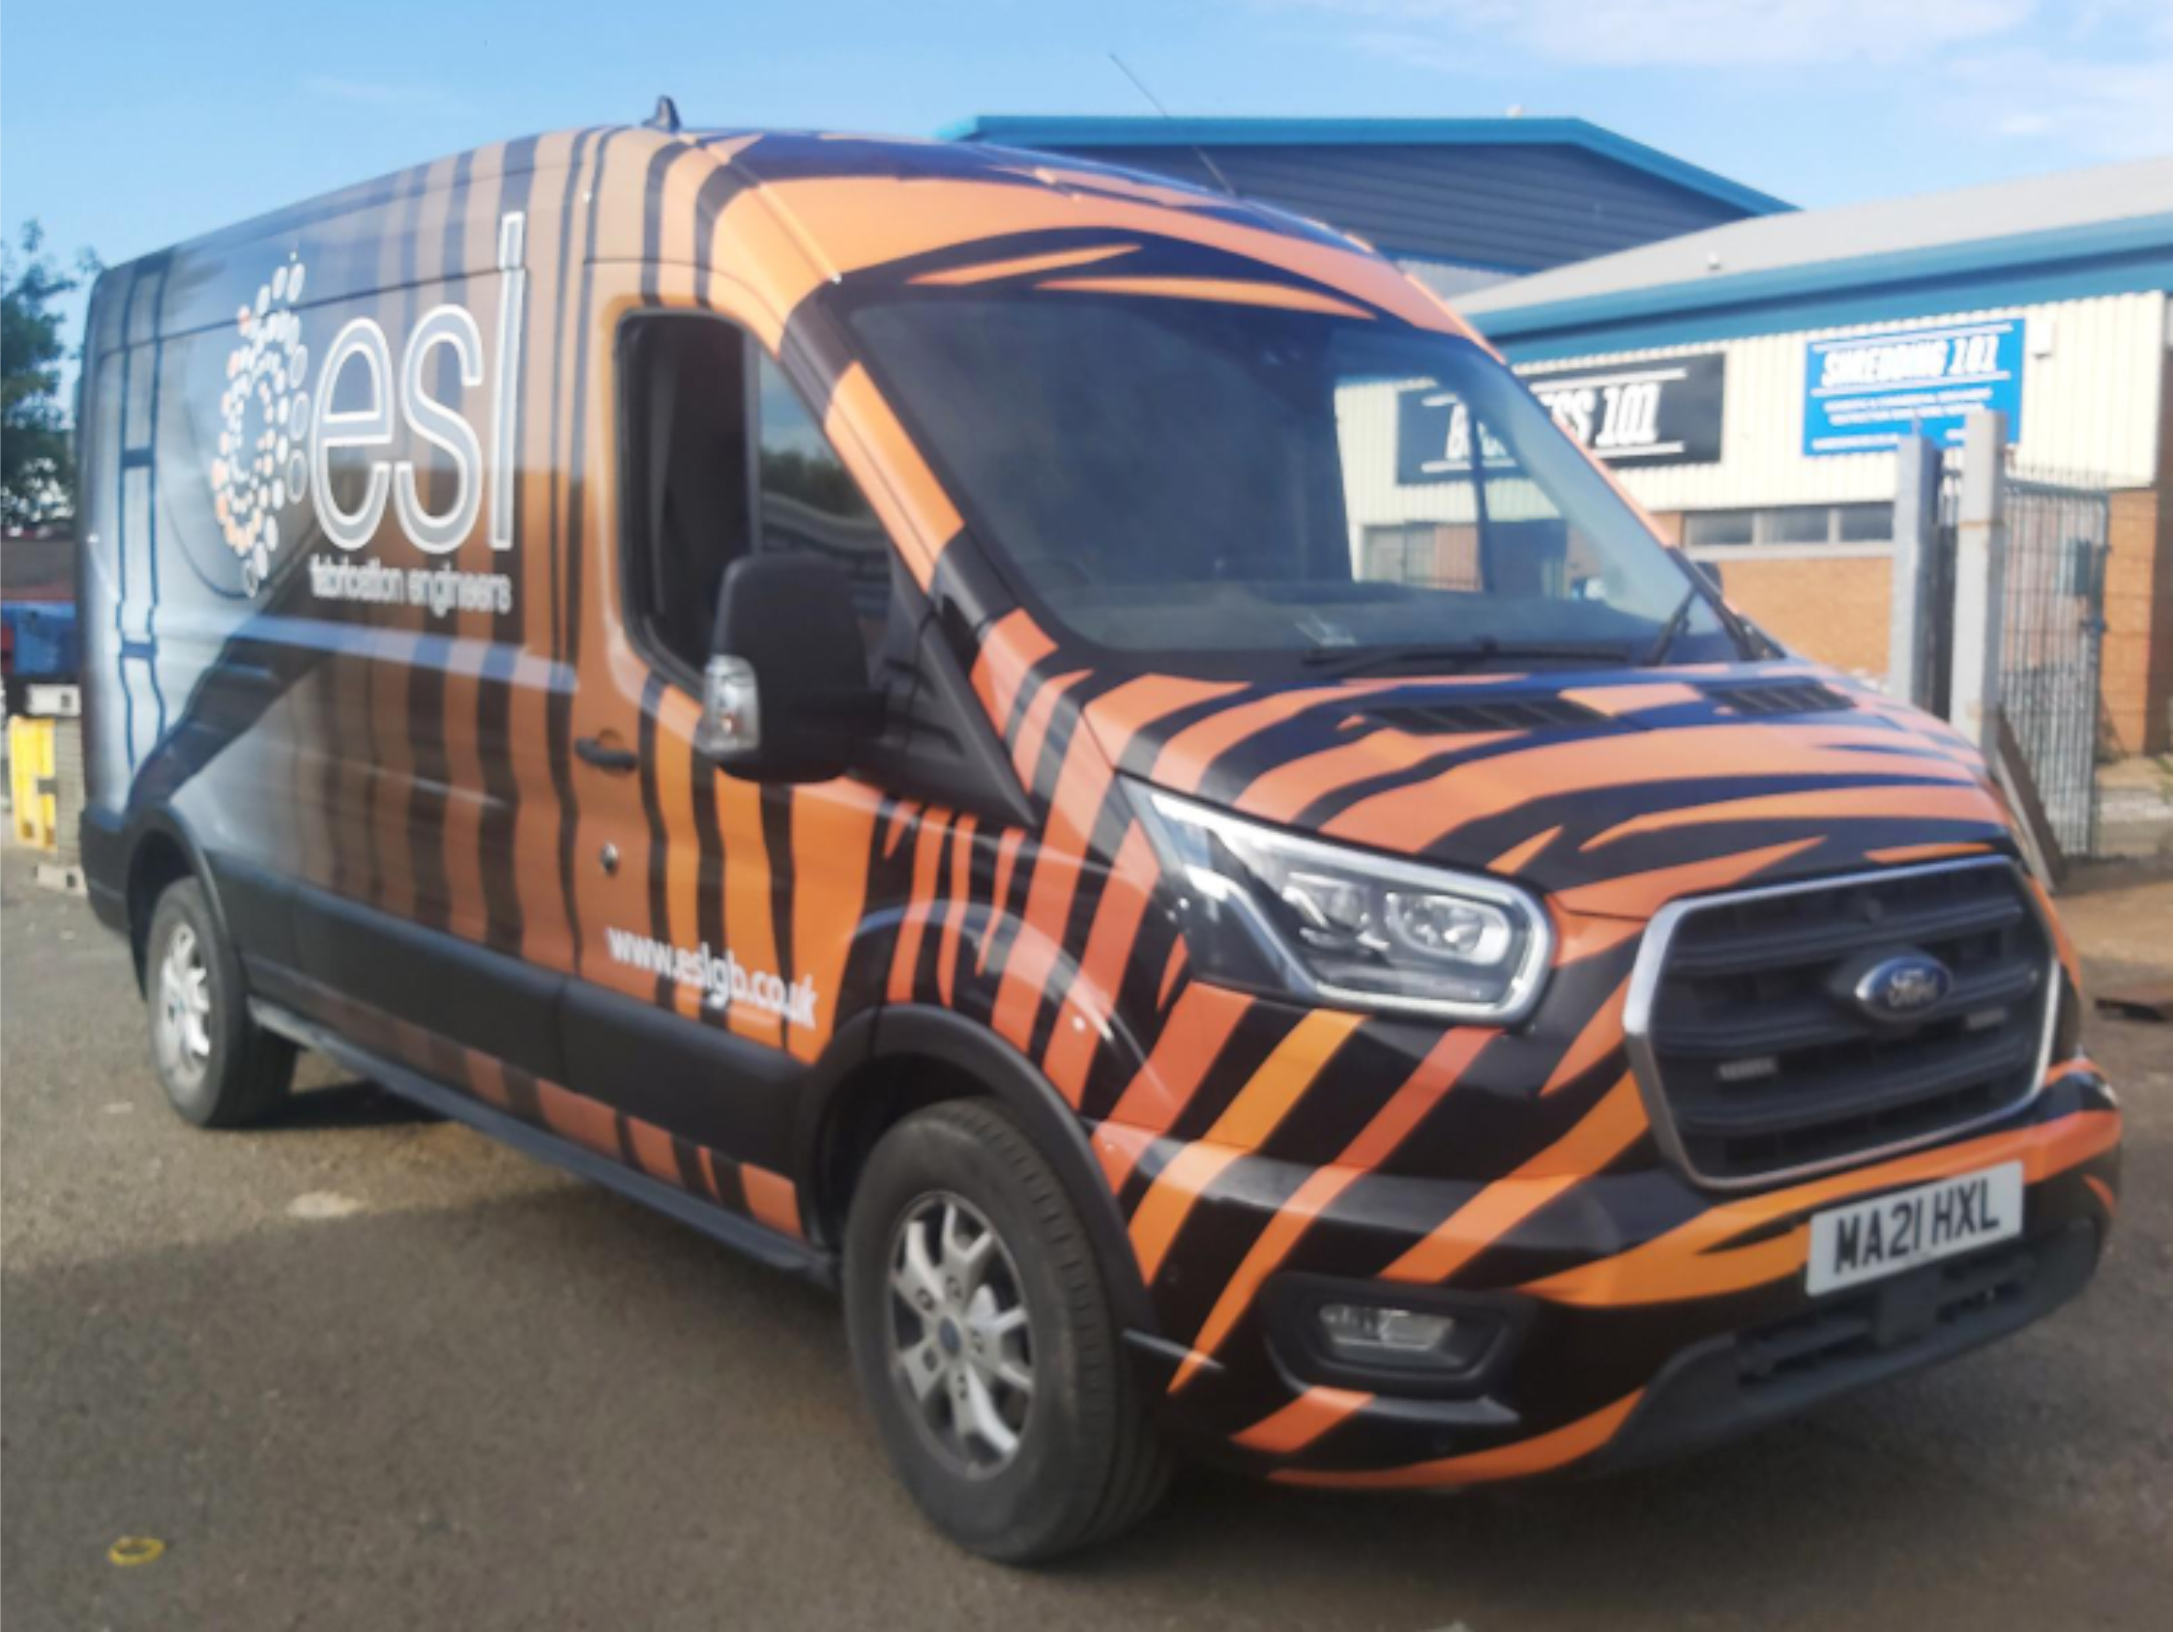 ESL Full Wrap by Business 101 in Hull